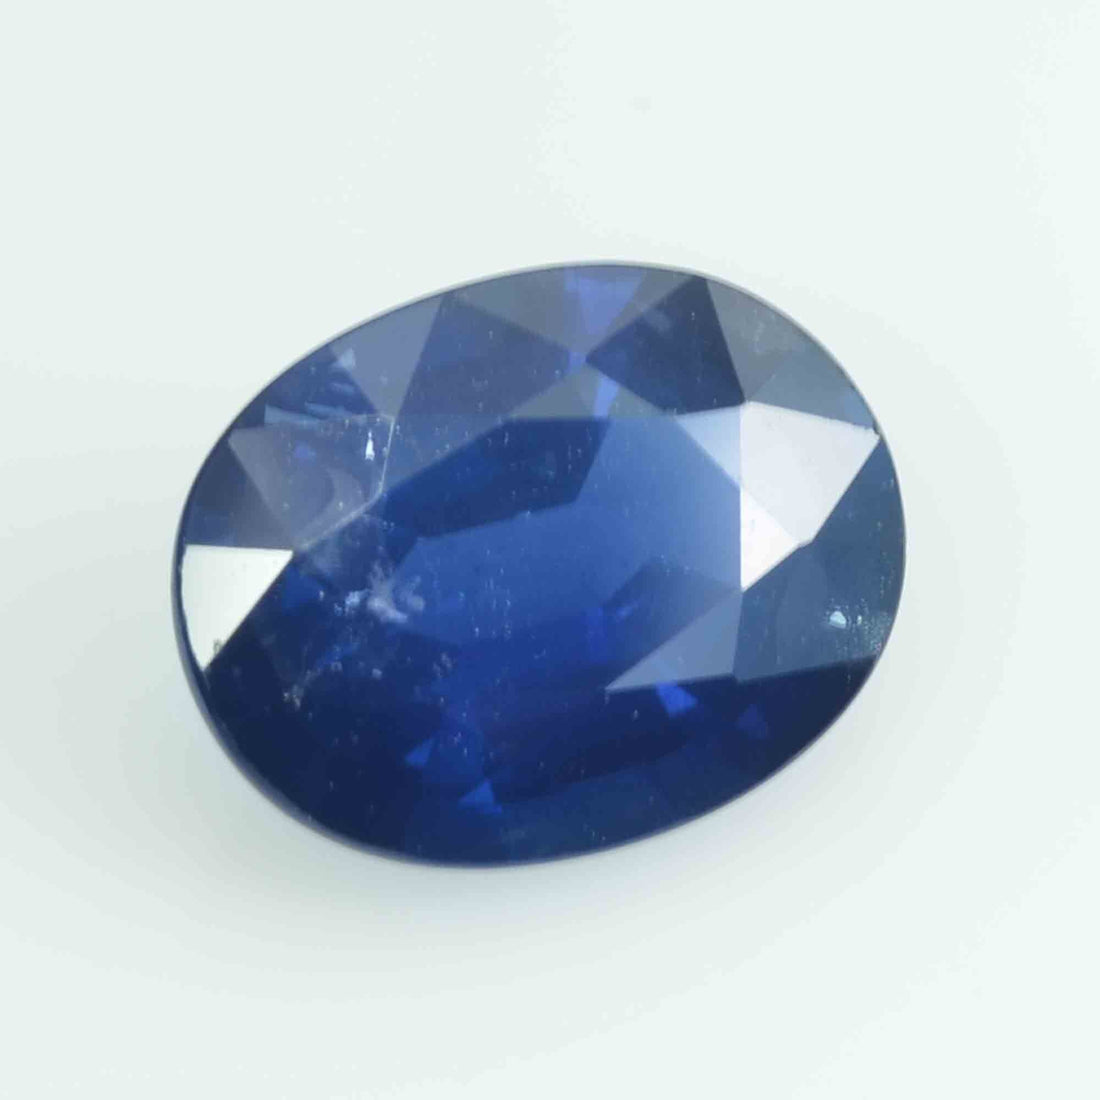 2.06 Cts Natural Blue Sapphire Loose Gemstone Oval Cut